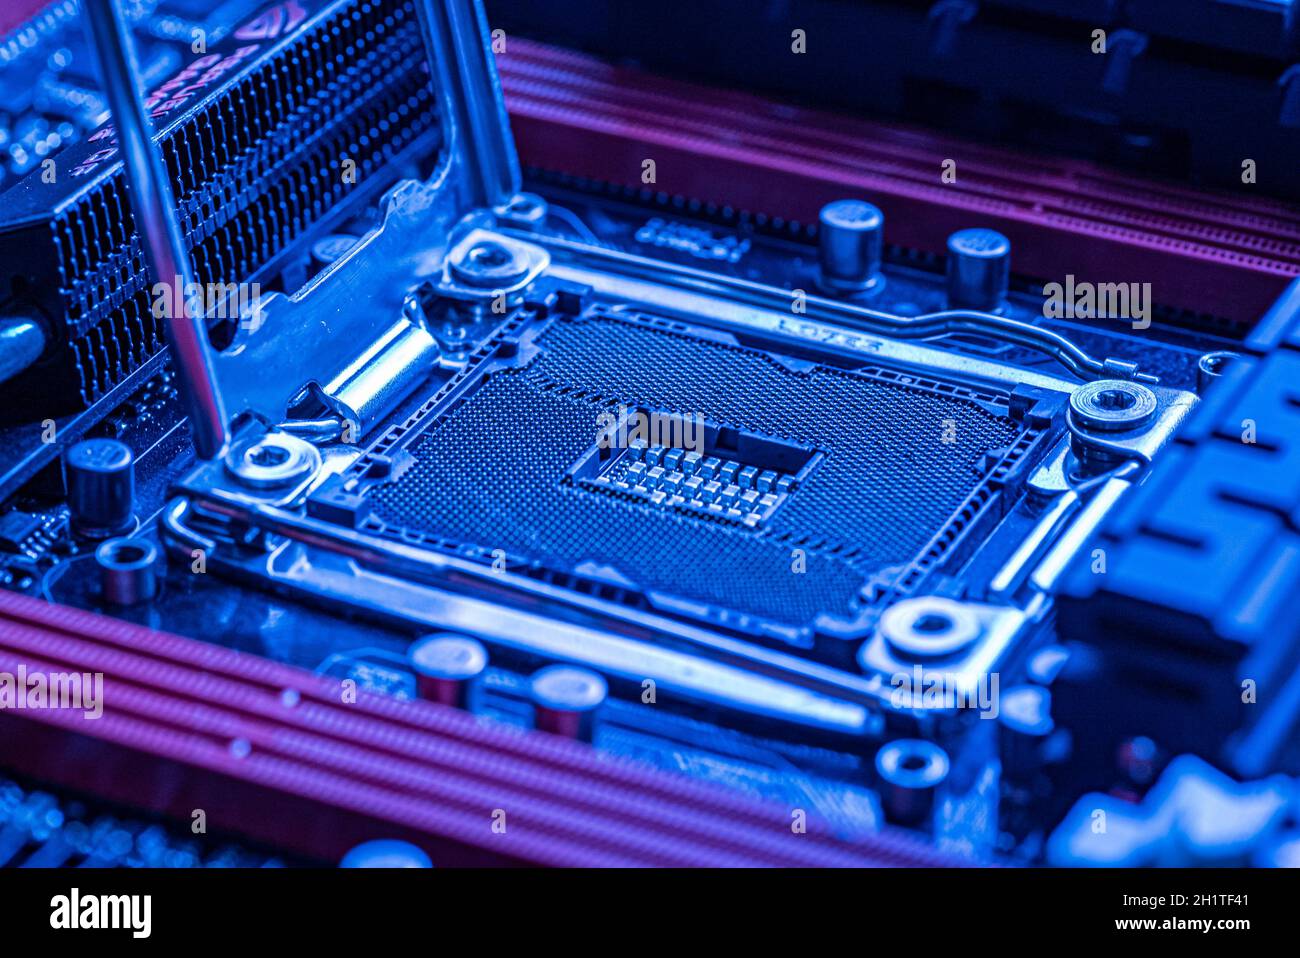 Detail of a Cpu socket in a motherboard of a gaming pc in bluie light Stock Photo